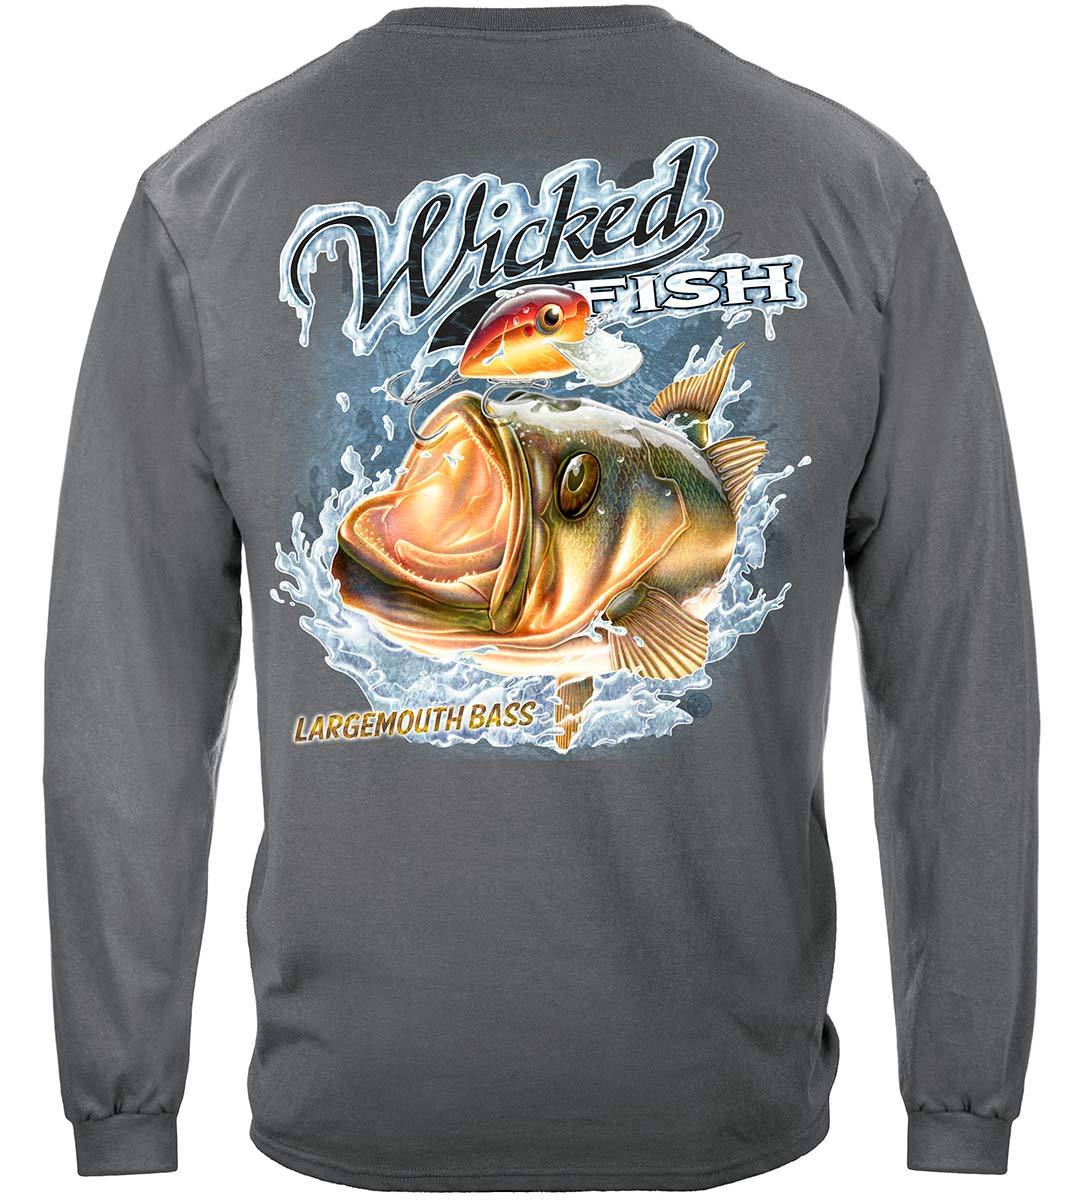 Fishing T-Shirt Wicked Fish Large Mouth Bass with Popper Chrcoal Gray